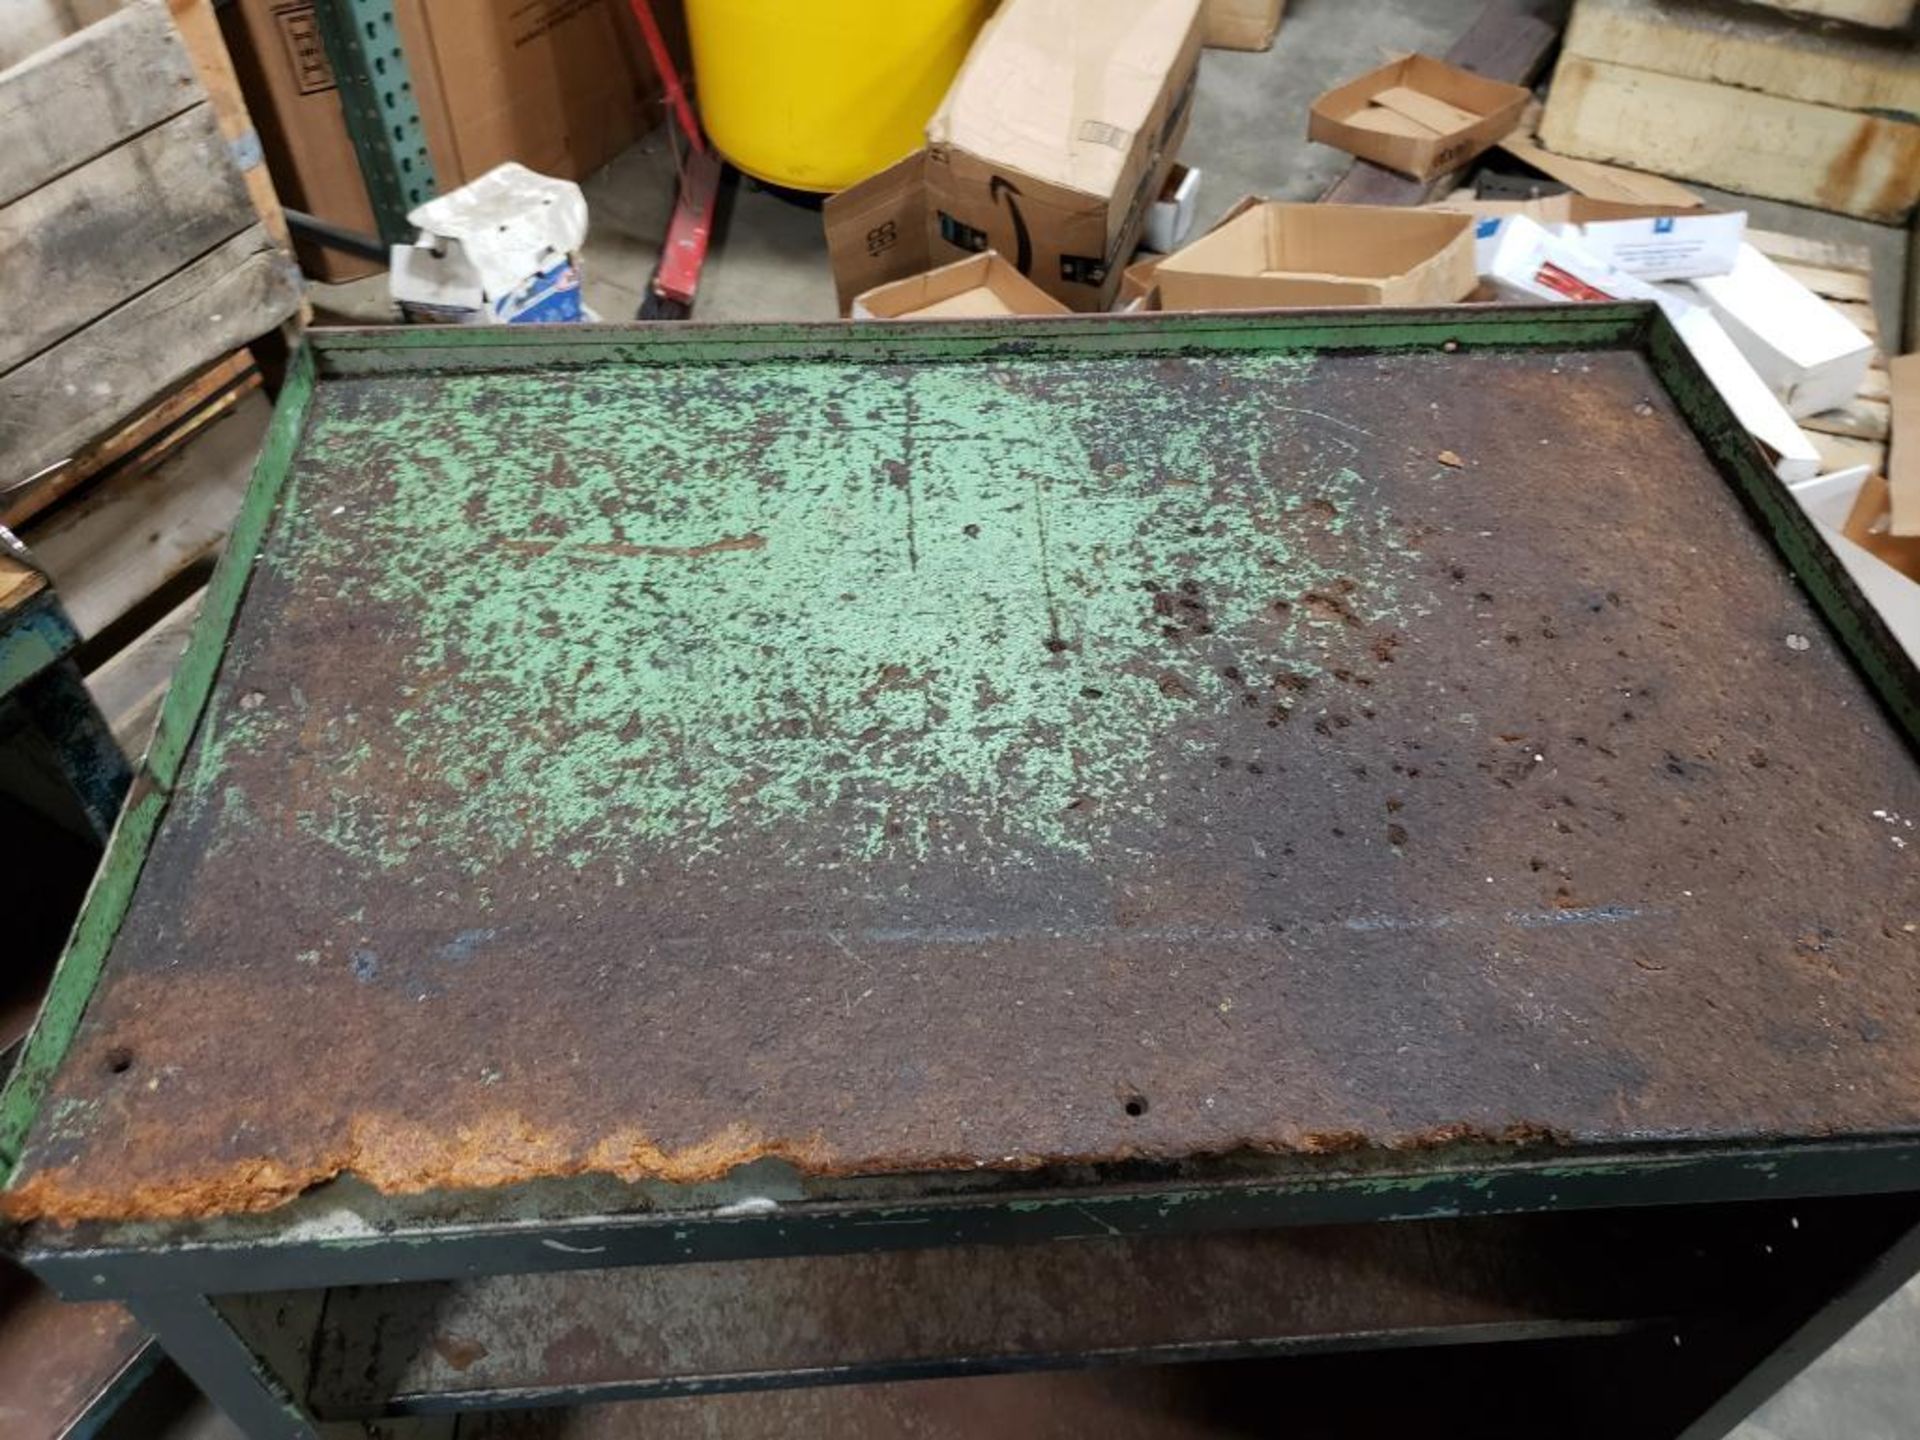 Qty 2 - Industrial work table. 36x24x36 WxDxH. - Image 4 of 6